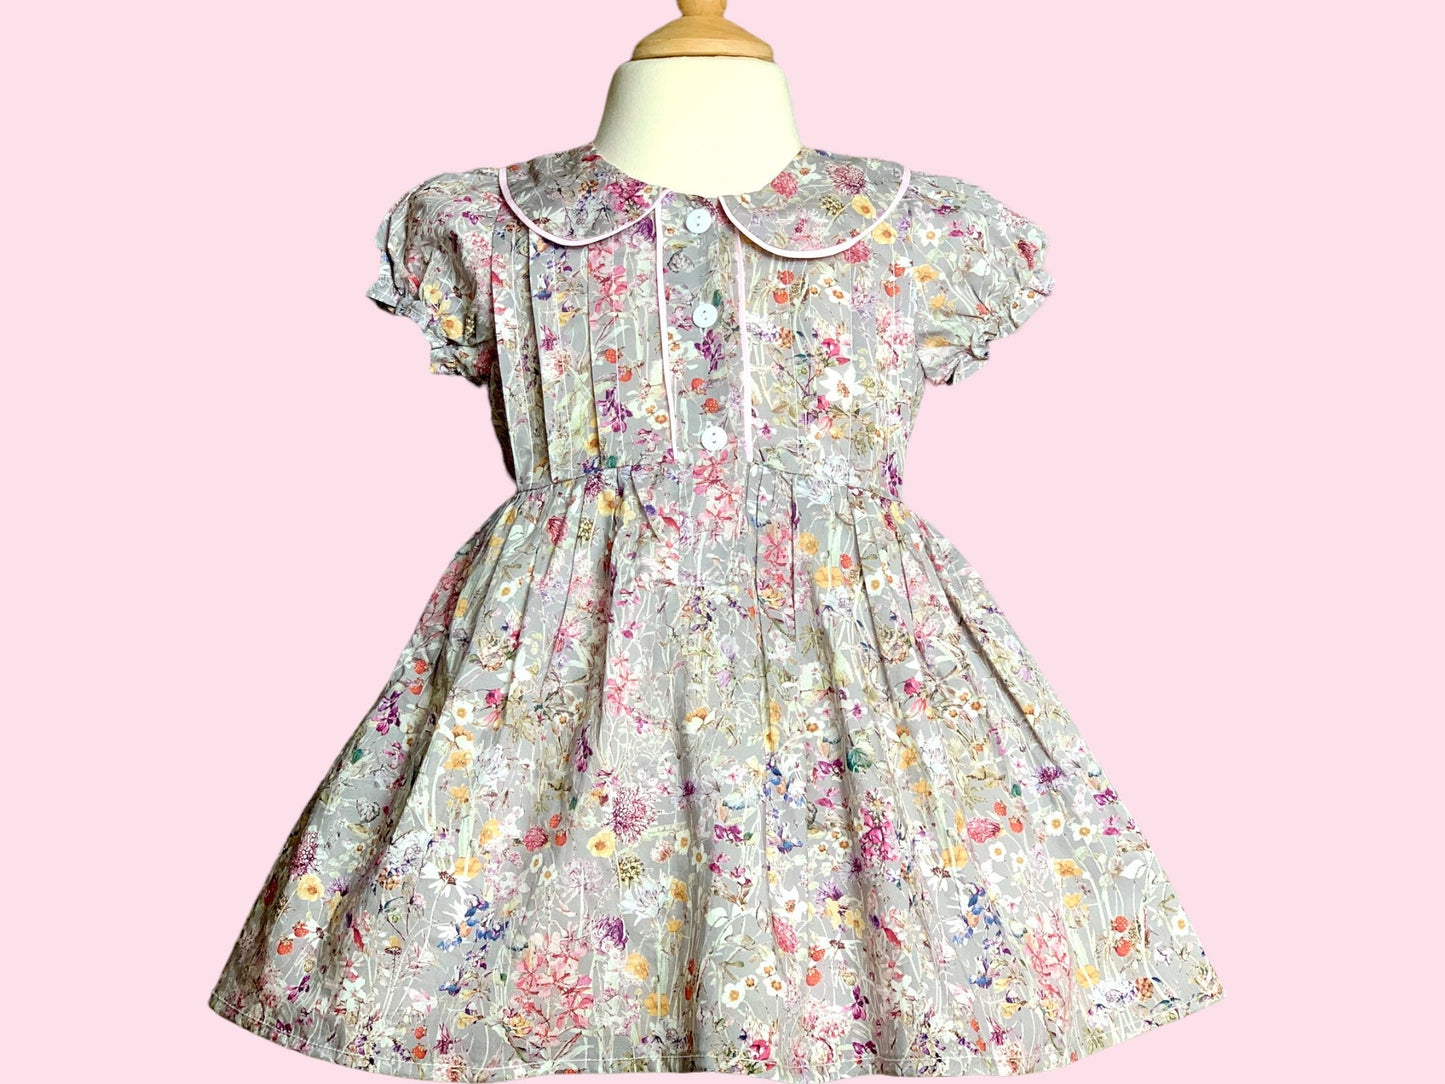 Liberty of London little girl dress organic cotton, floral animal print wedding baptism christening baby outfits first birthday long sleeves short sleeves, eastern thanksgiving halloween Christmas gift new born ruffle Peter Pan scalloped petal collar